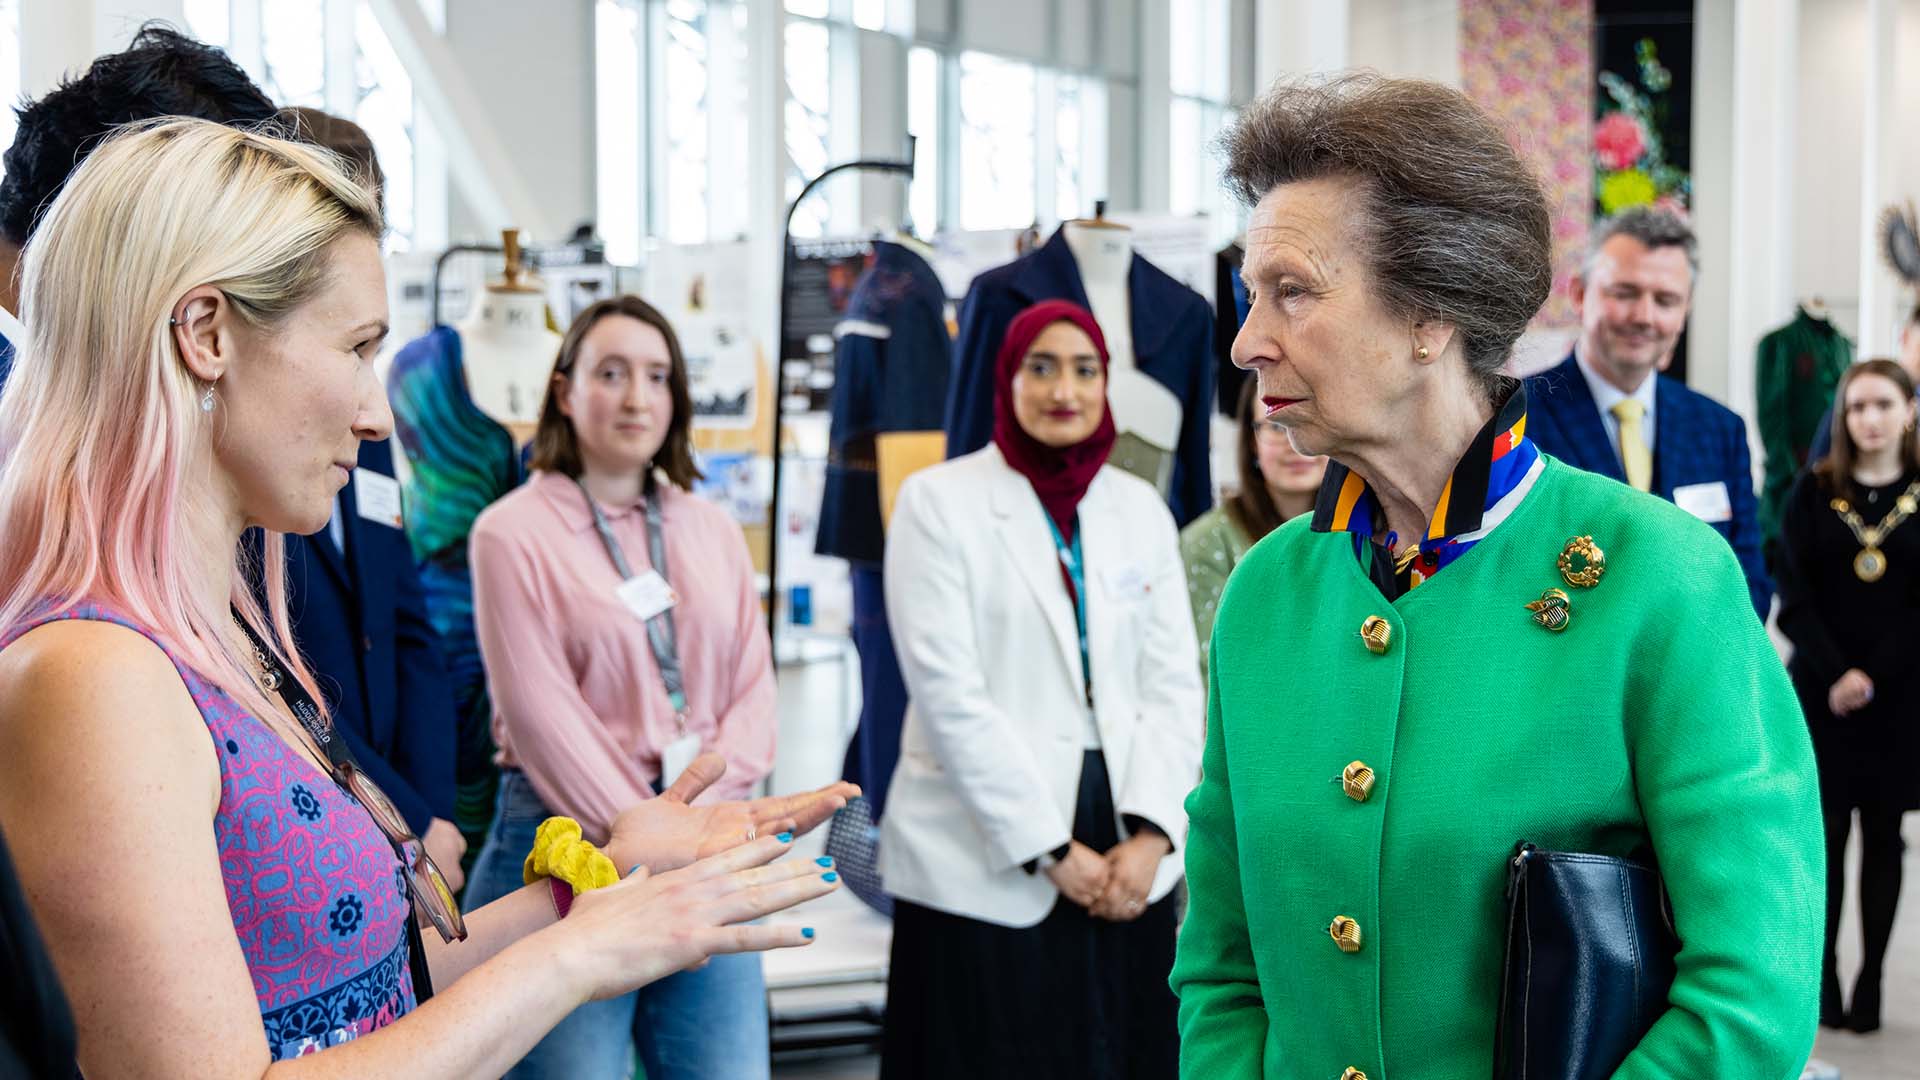 The Princess Royal speaks to students